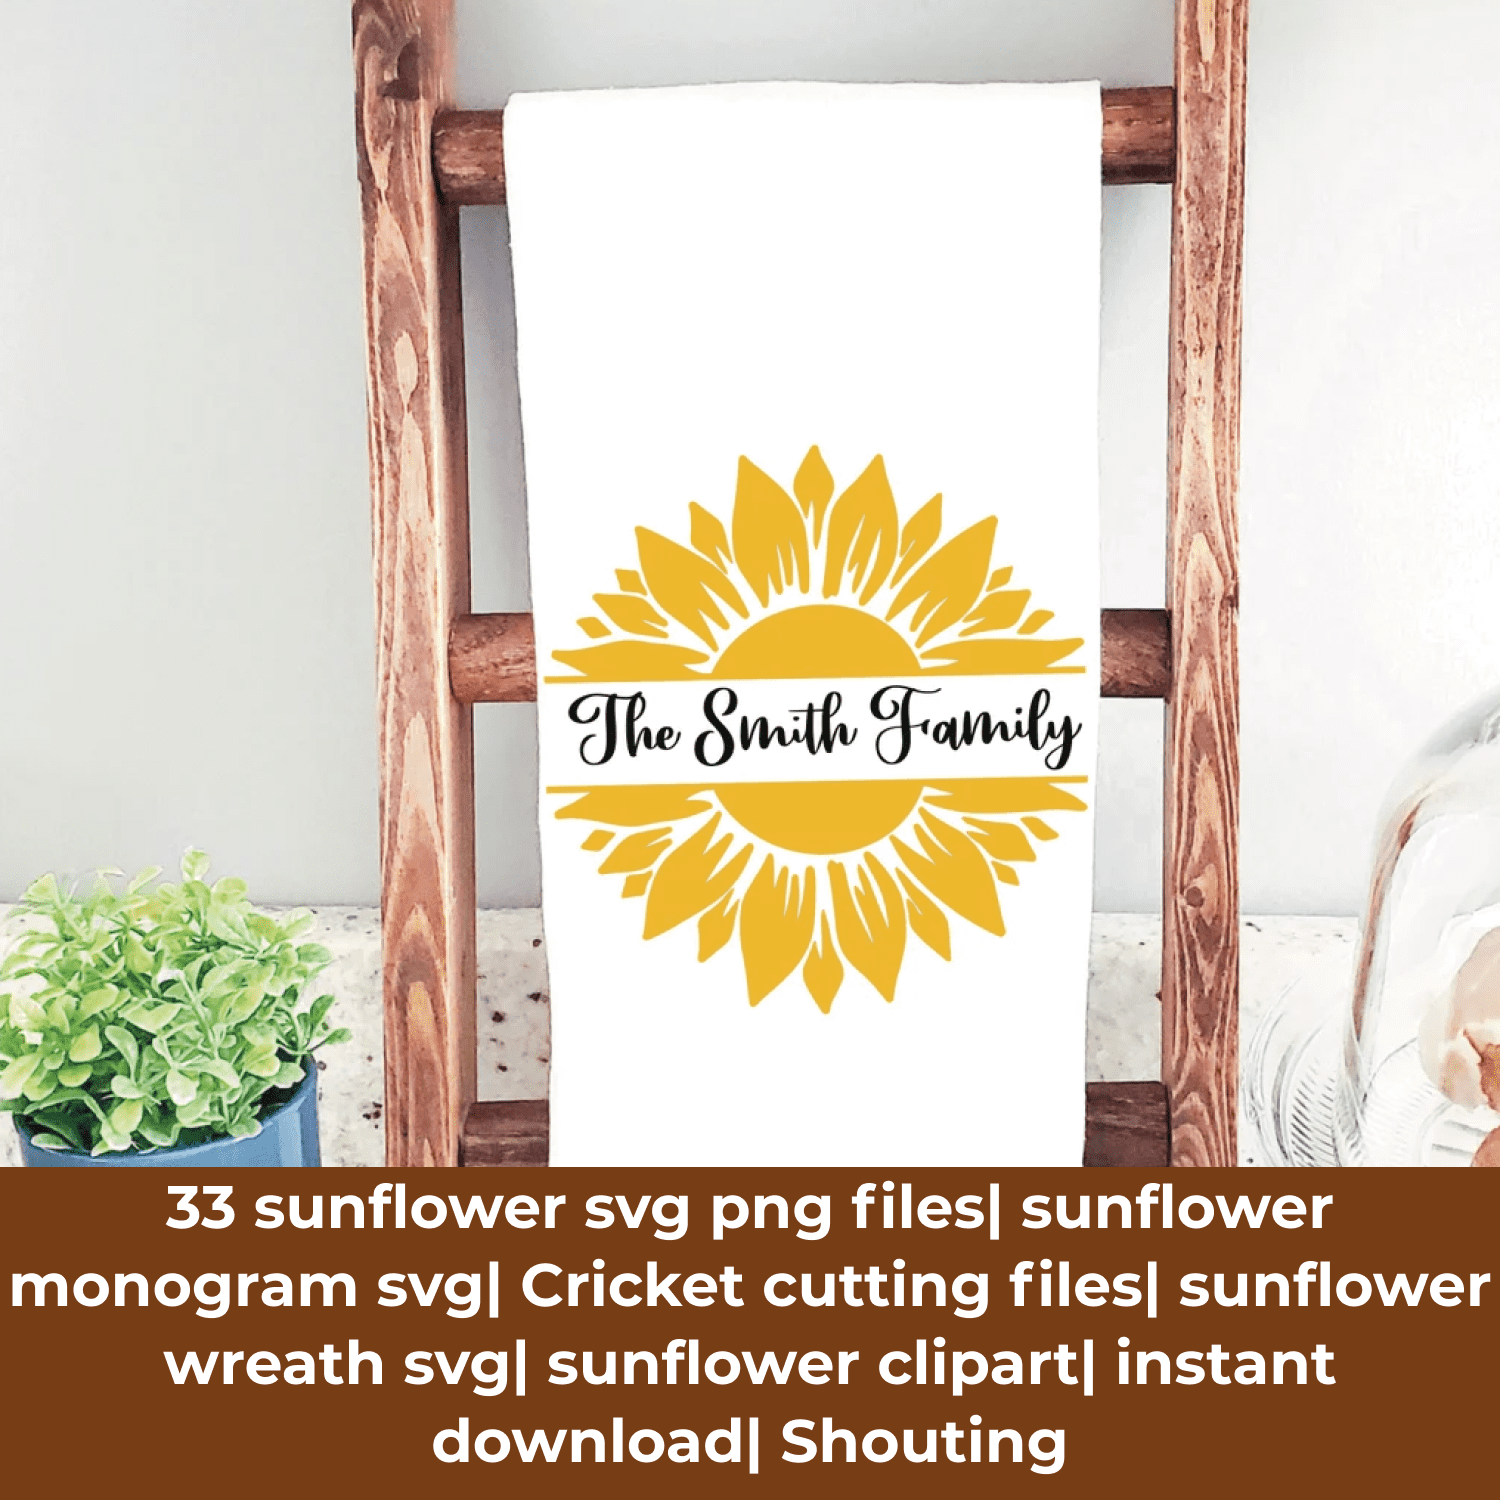 33 sunflower svg png files cover.